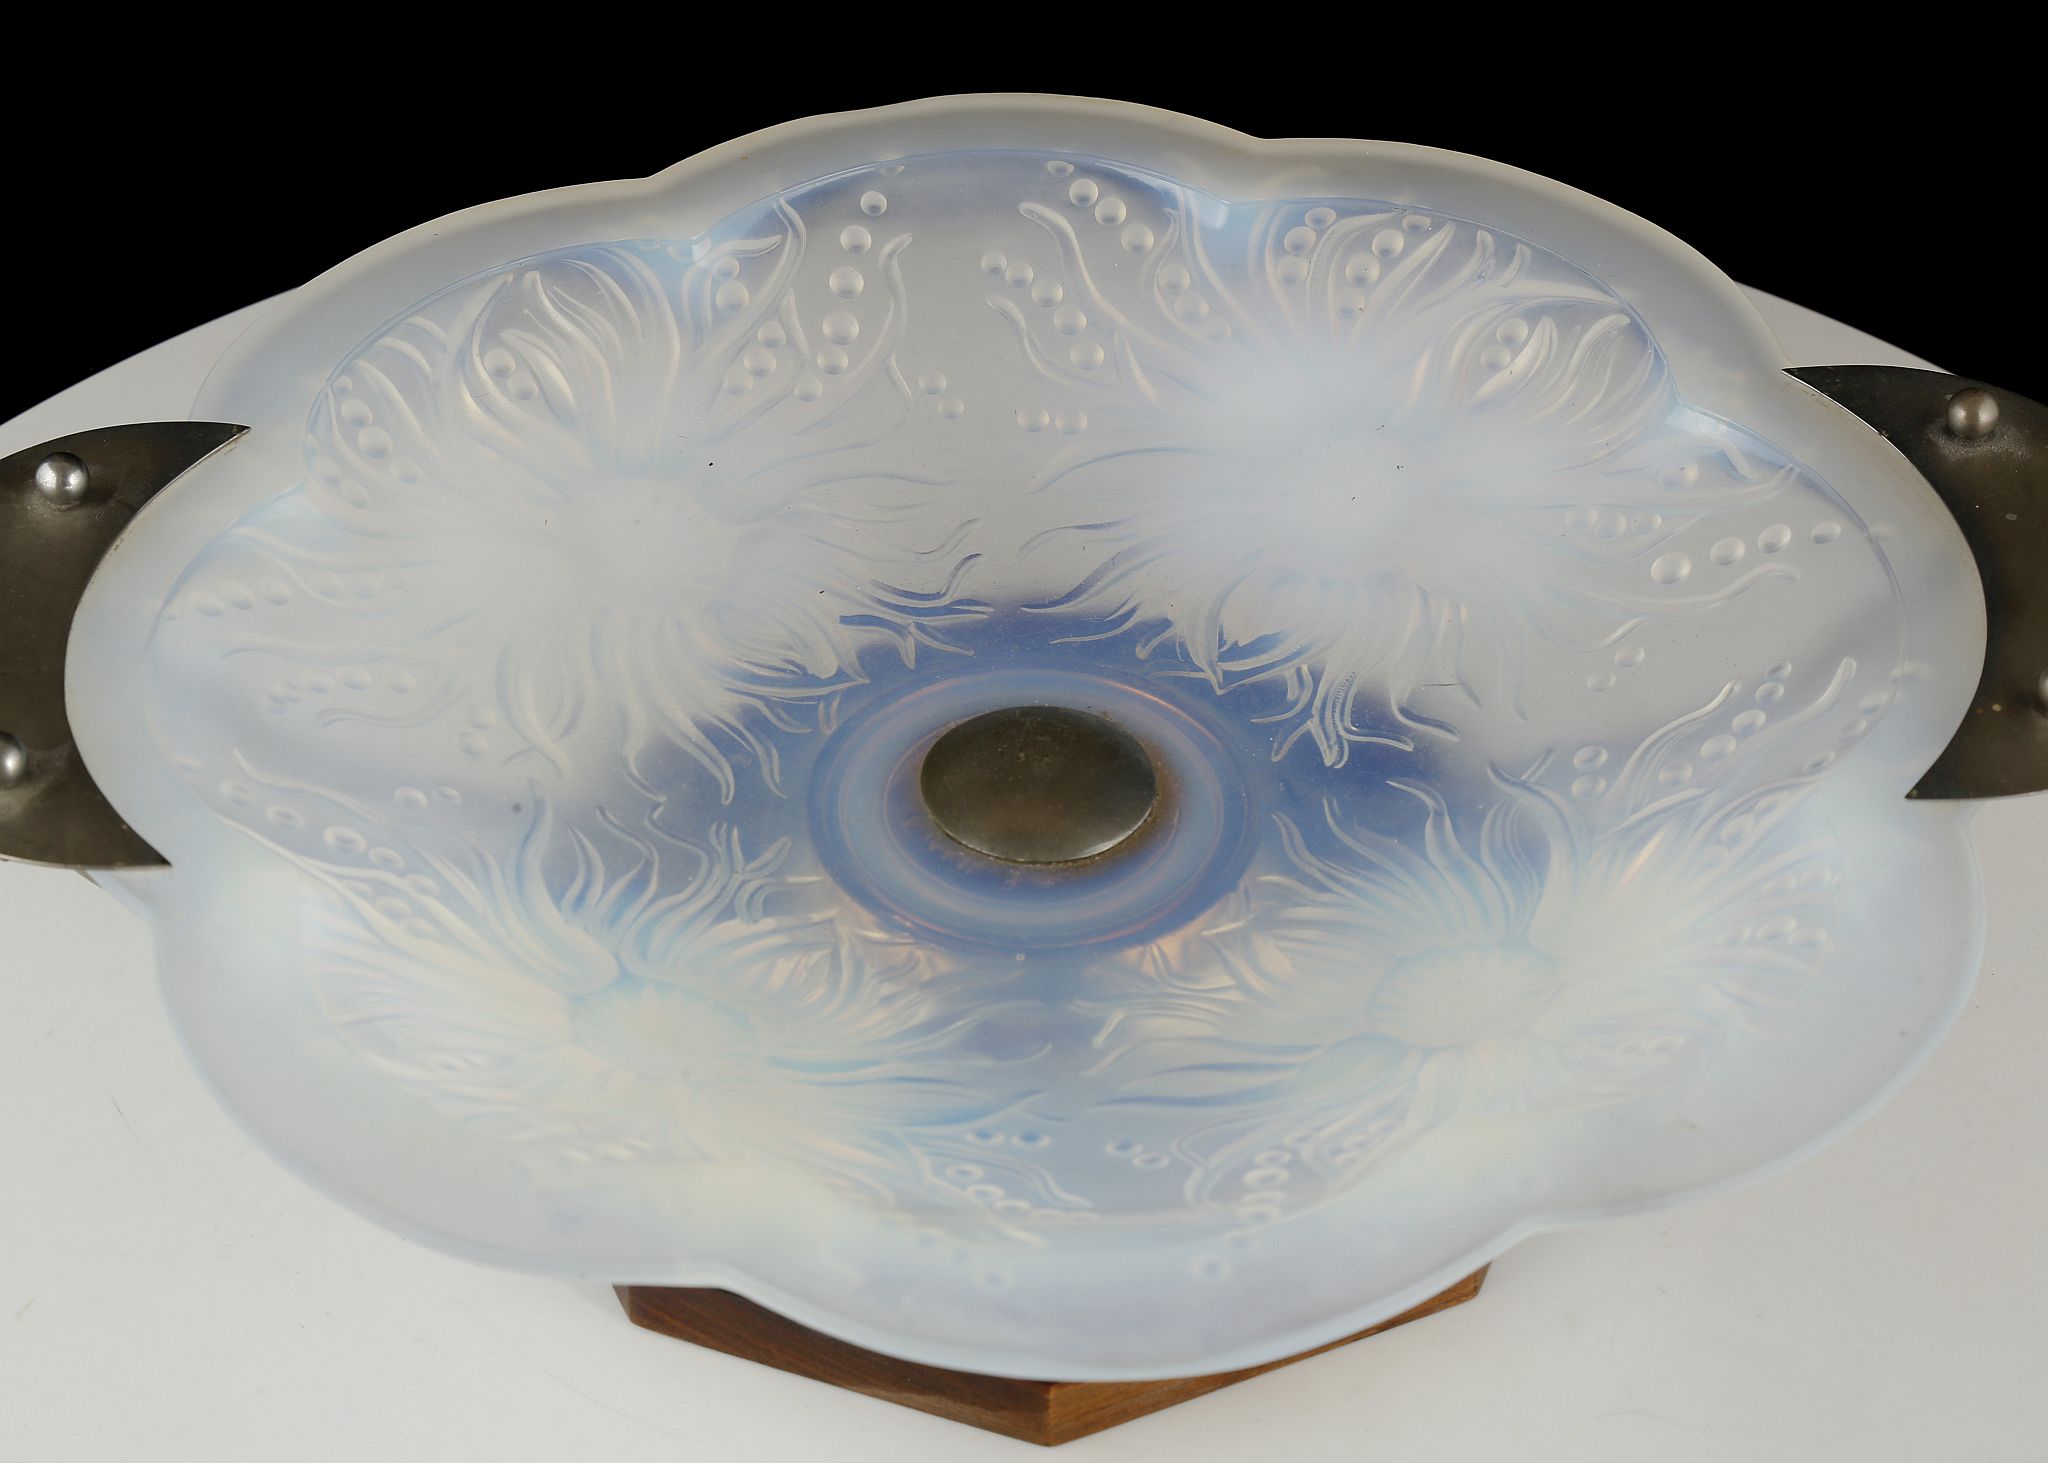 A 1930's OPALESCENT GLASS CENTREPIECE BOWL, with moulded sea urchin design, an metal mounted with - Image 2 of 4